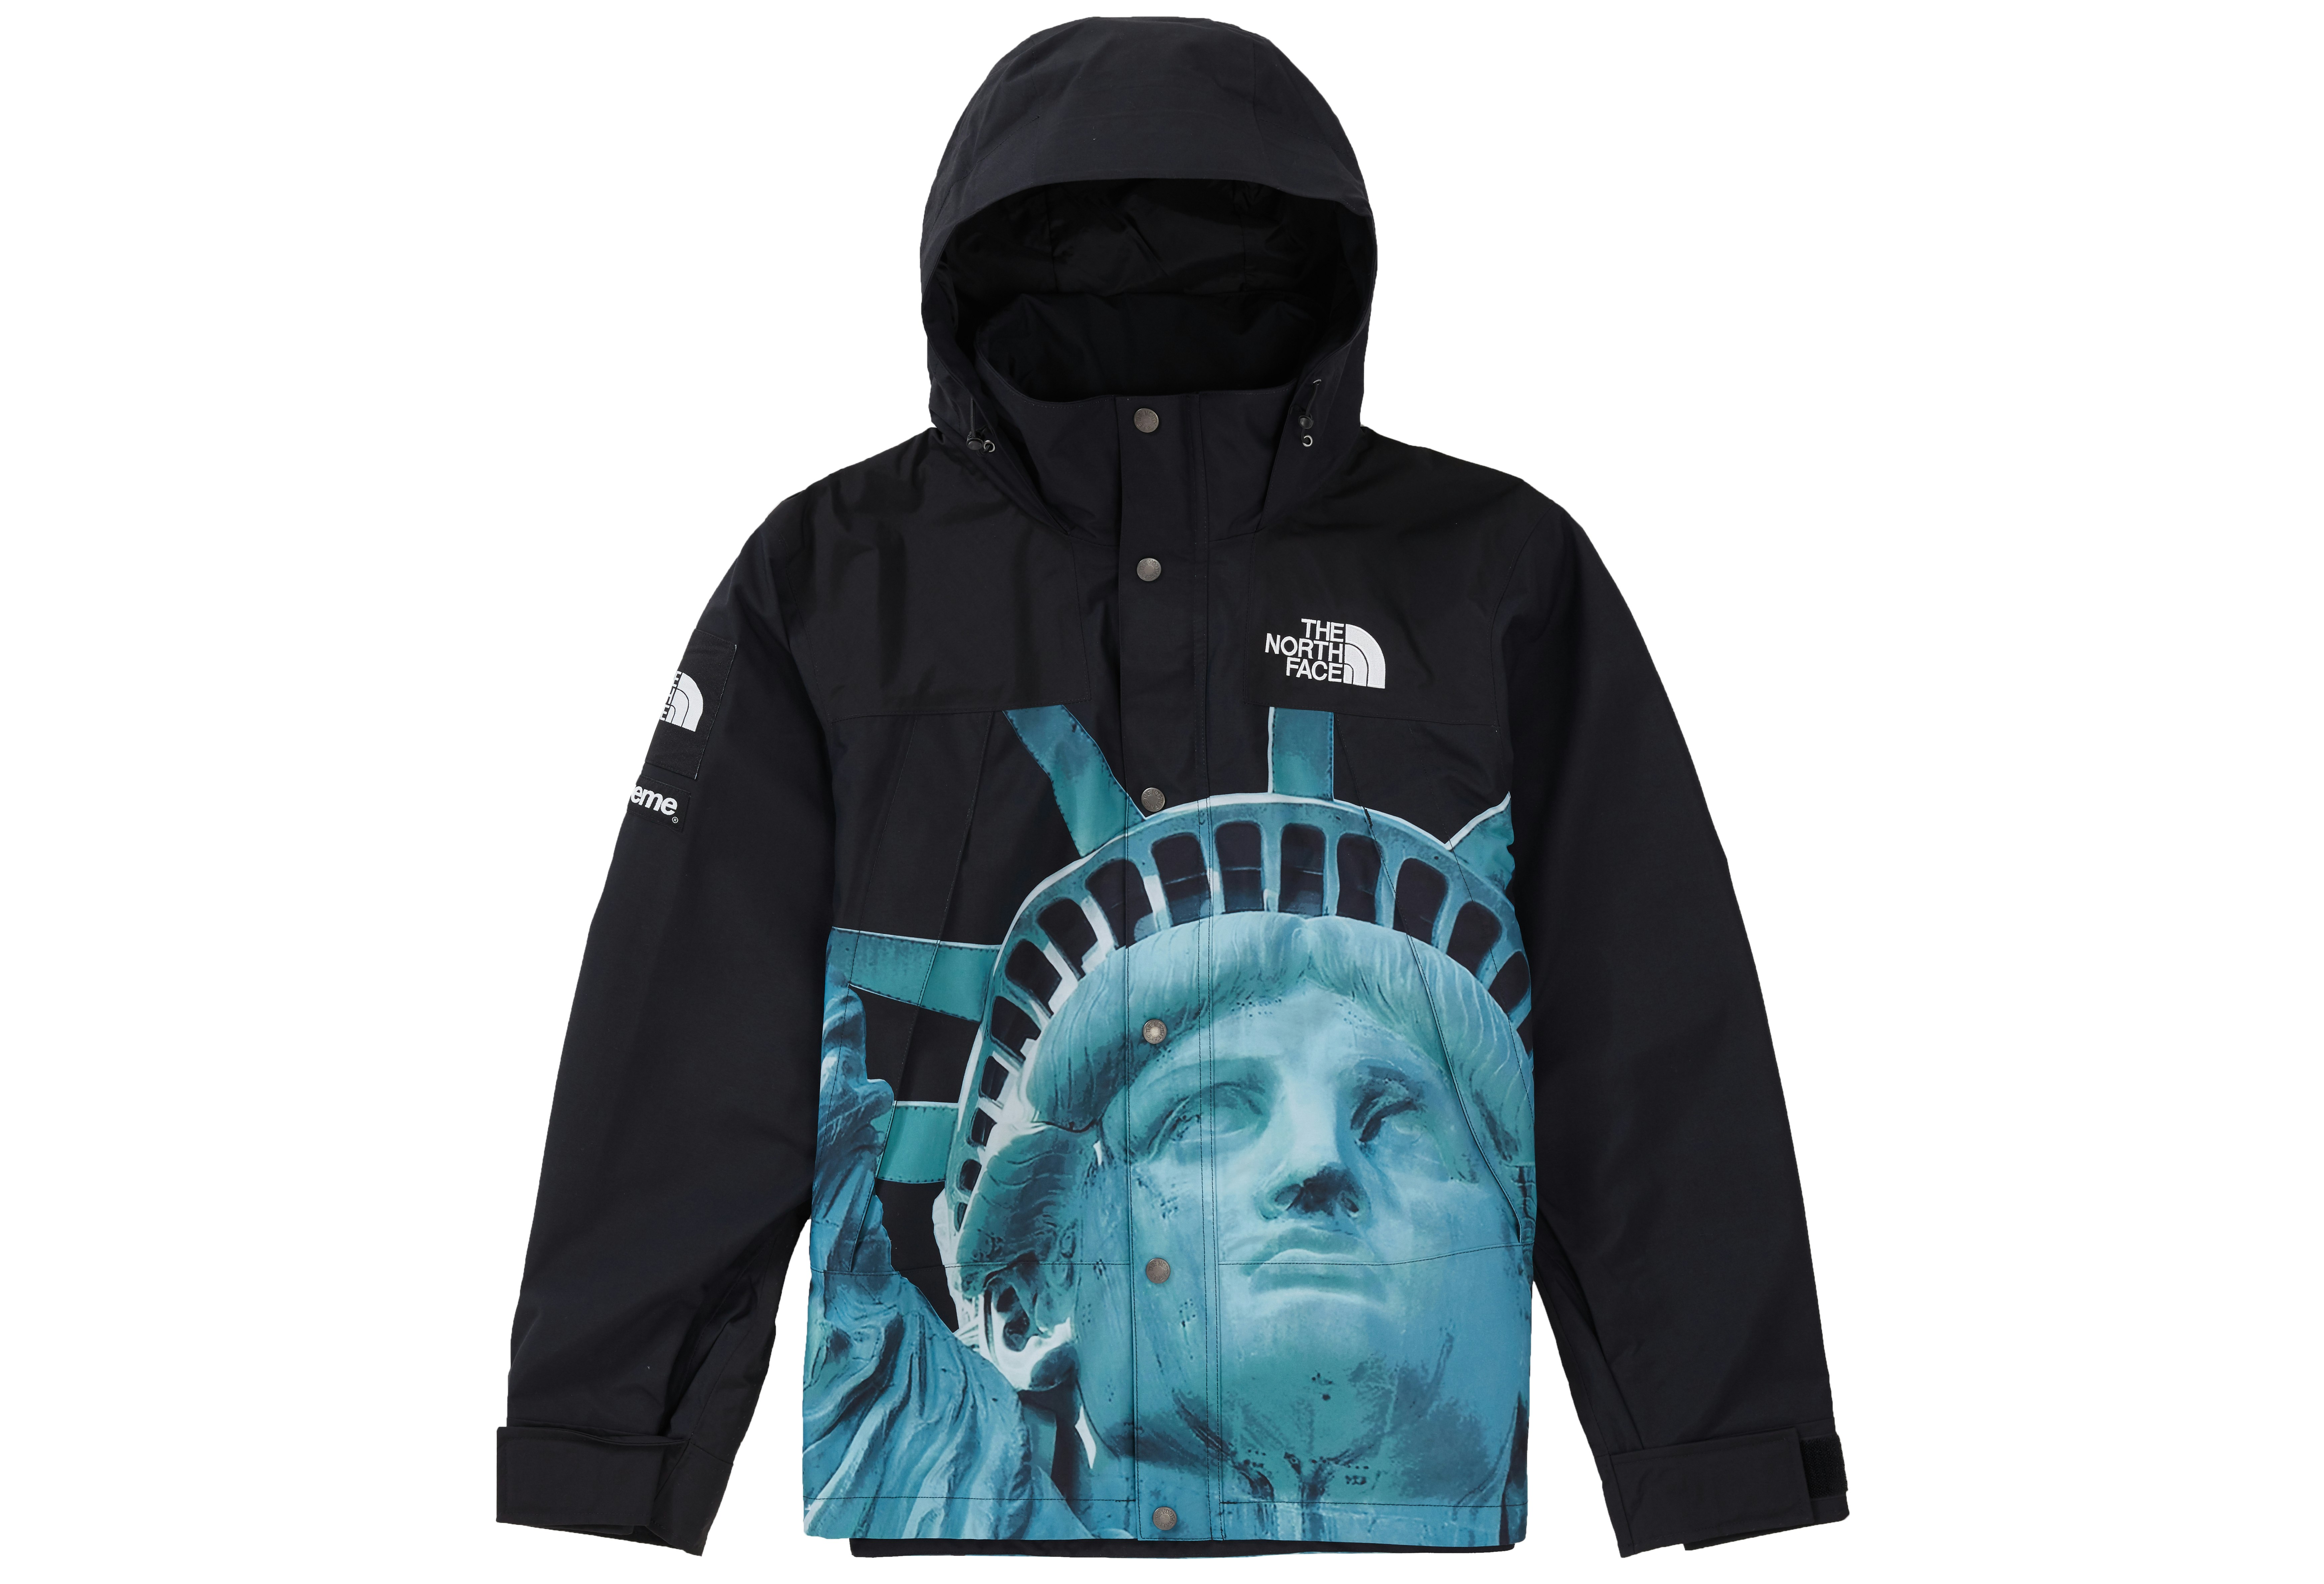 Supreme The North Face Statue of Liberty Mountain Jacket Black - FW19